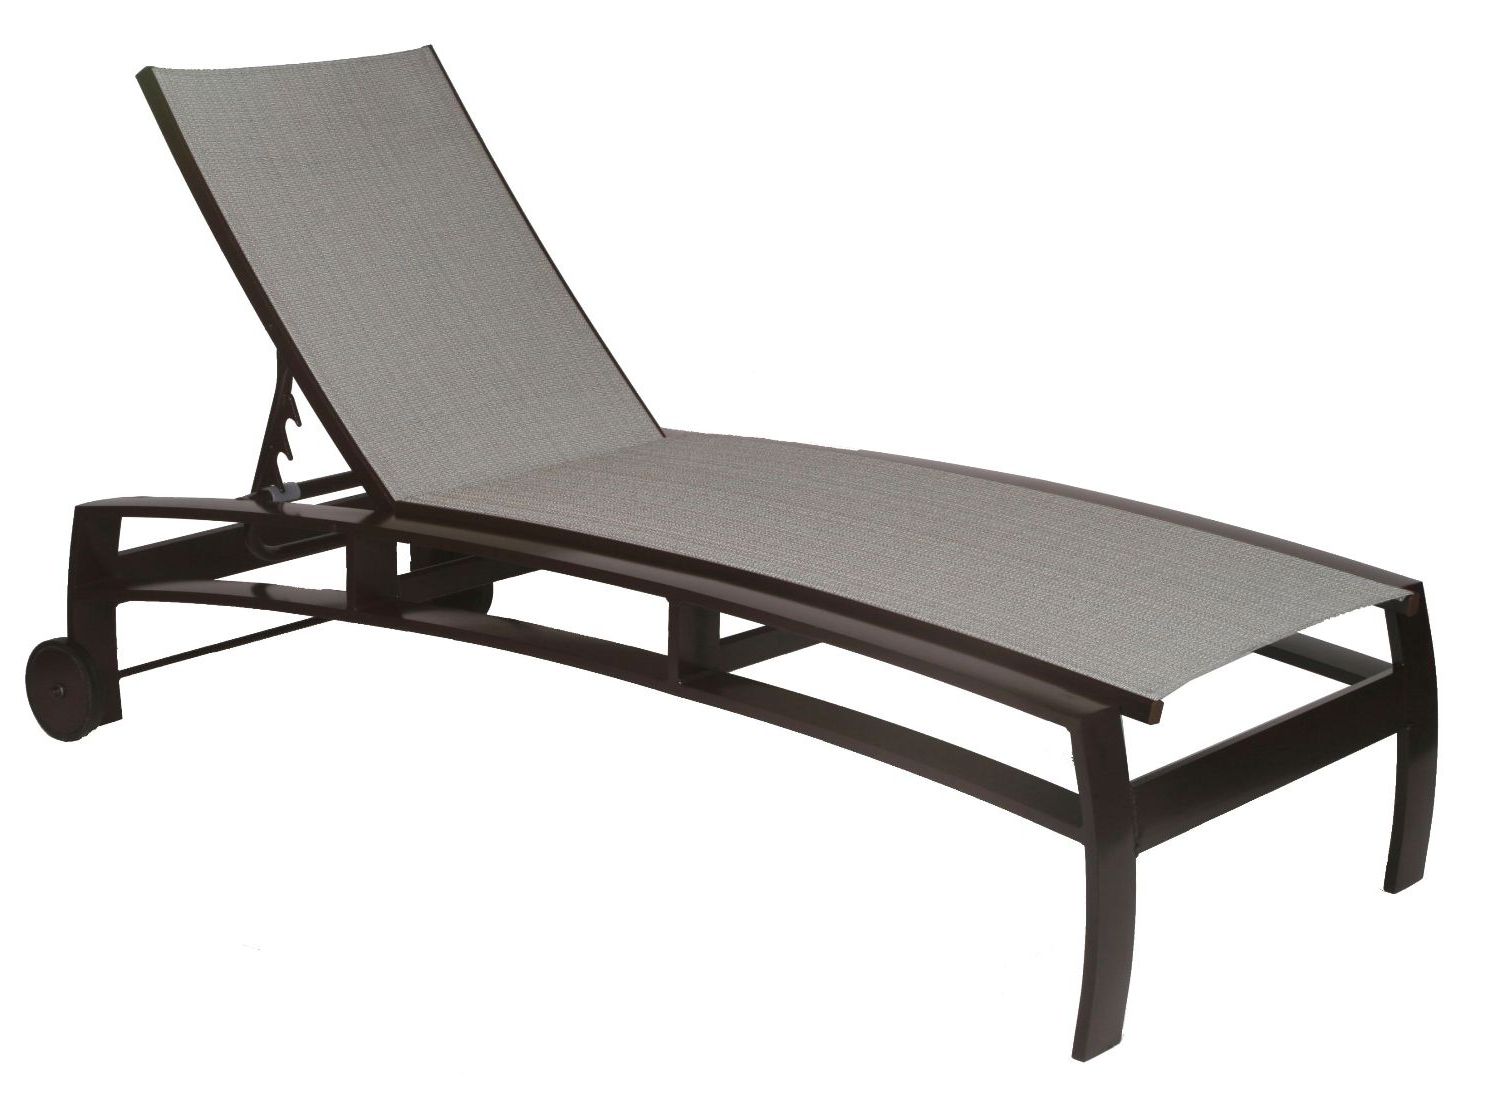 Sling Patio Chaise Lounges Throughout Well Liked Suncoast Pinnacle Sling – E600 – Chaise Lounge With Arms (View 21 of 25)